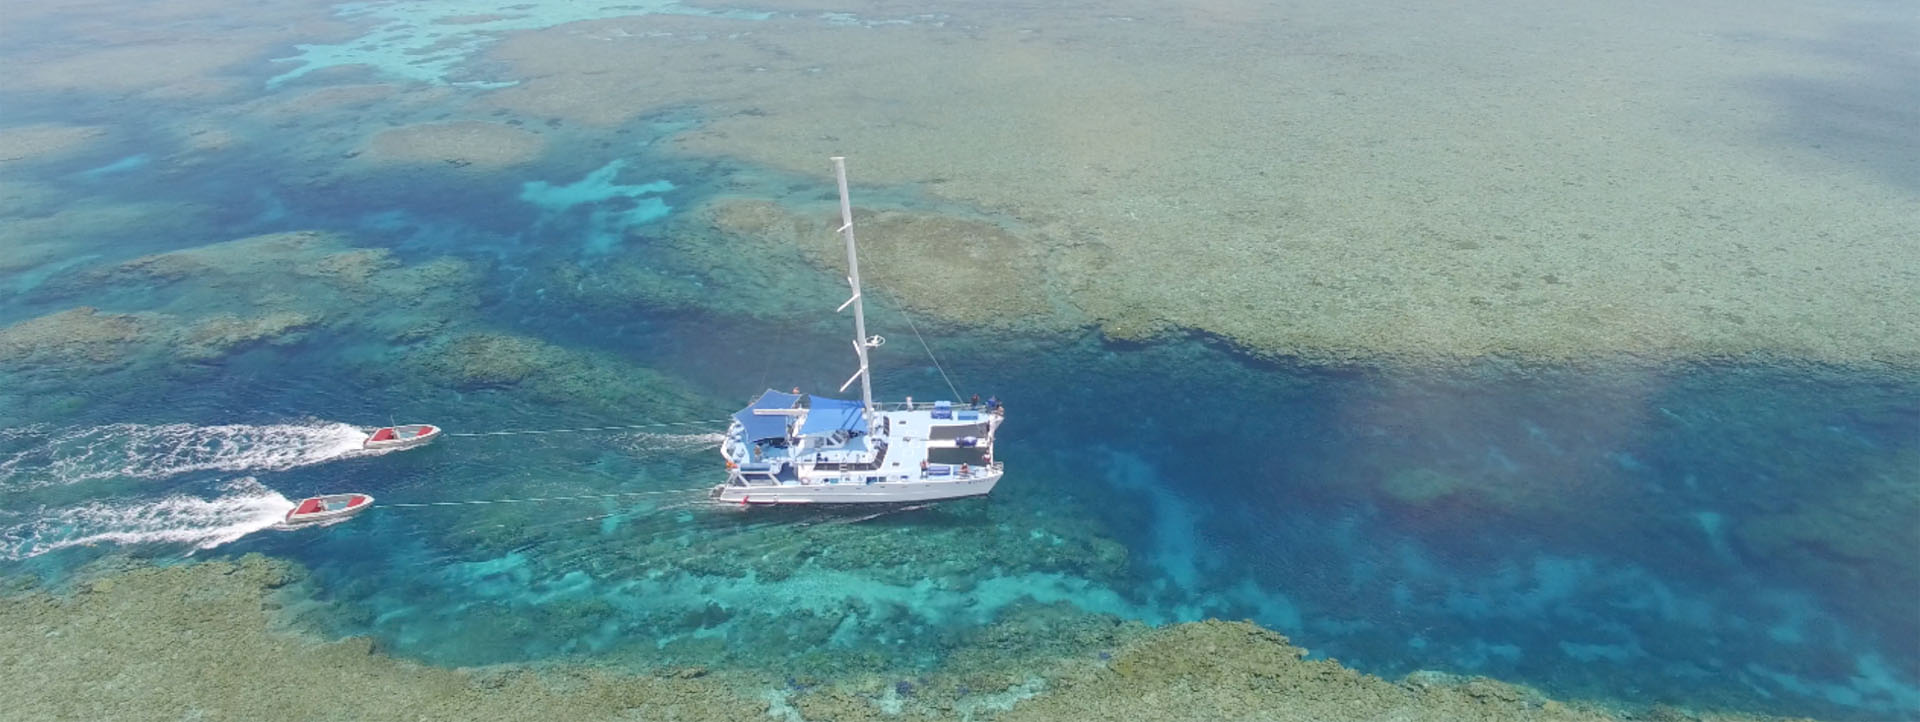 KARMA IV Rowley Shoals aerial photo reef and vessel